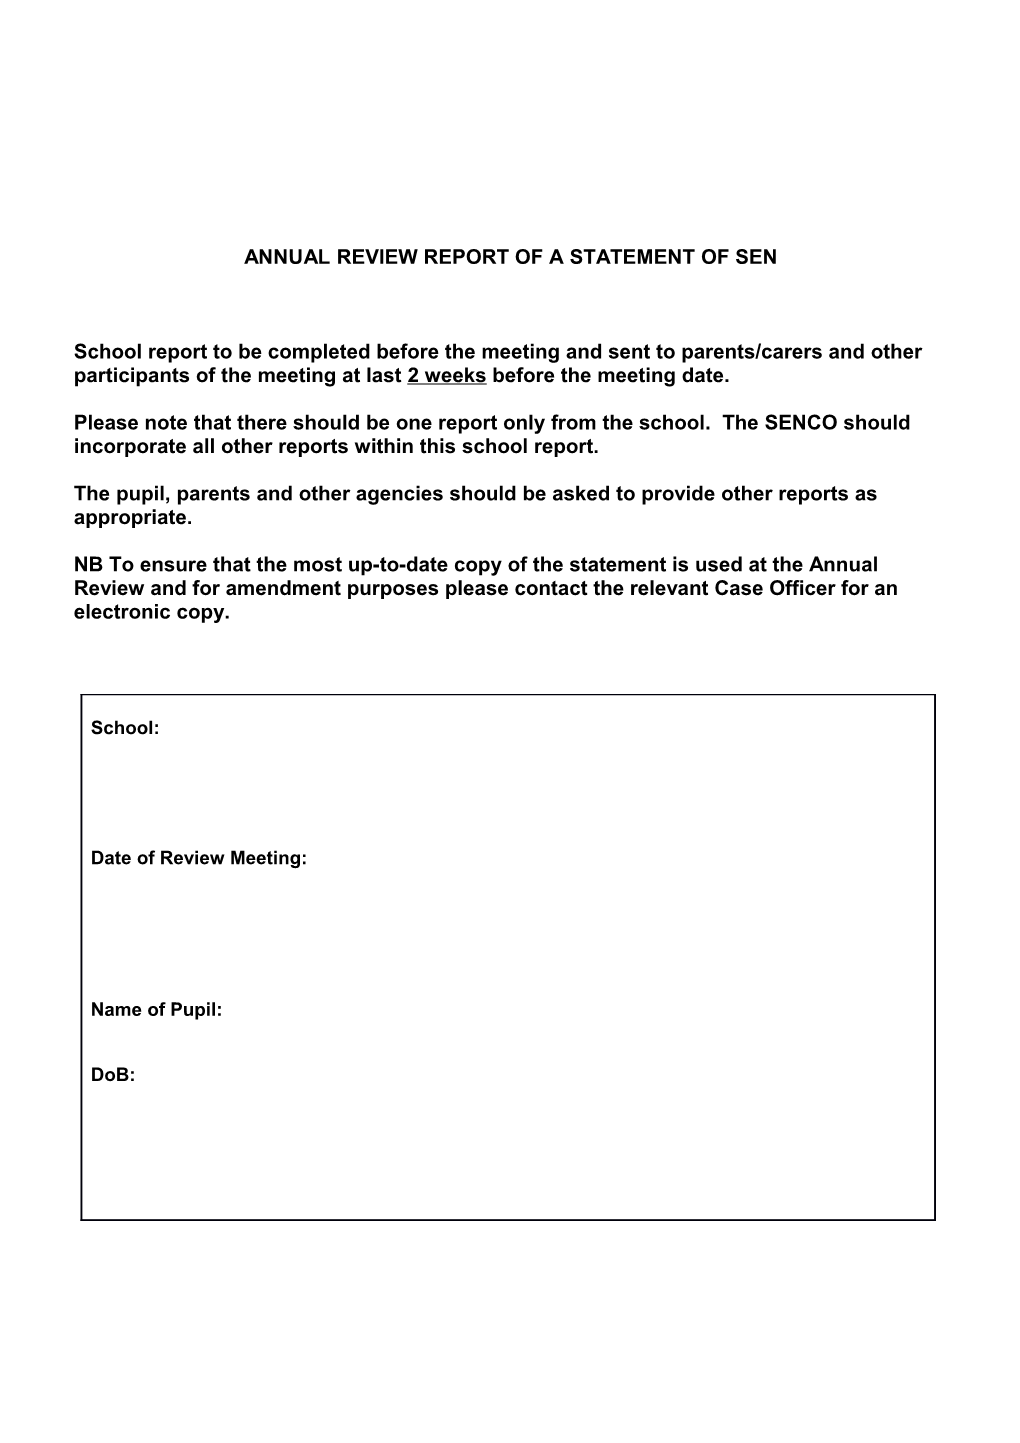 Annual Review Report of a Statement of Sen